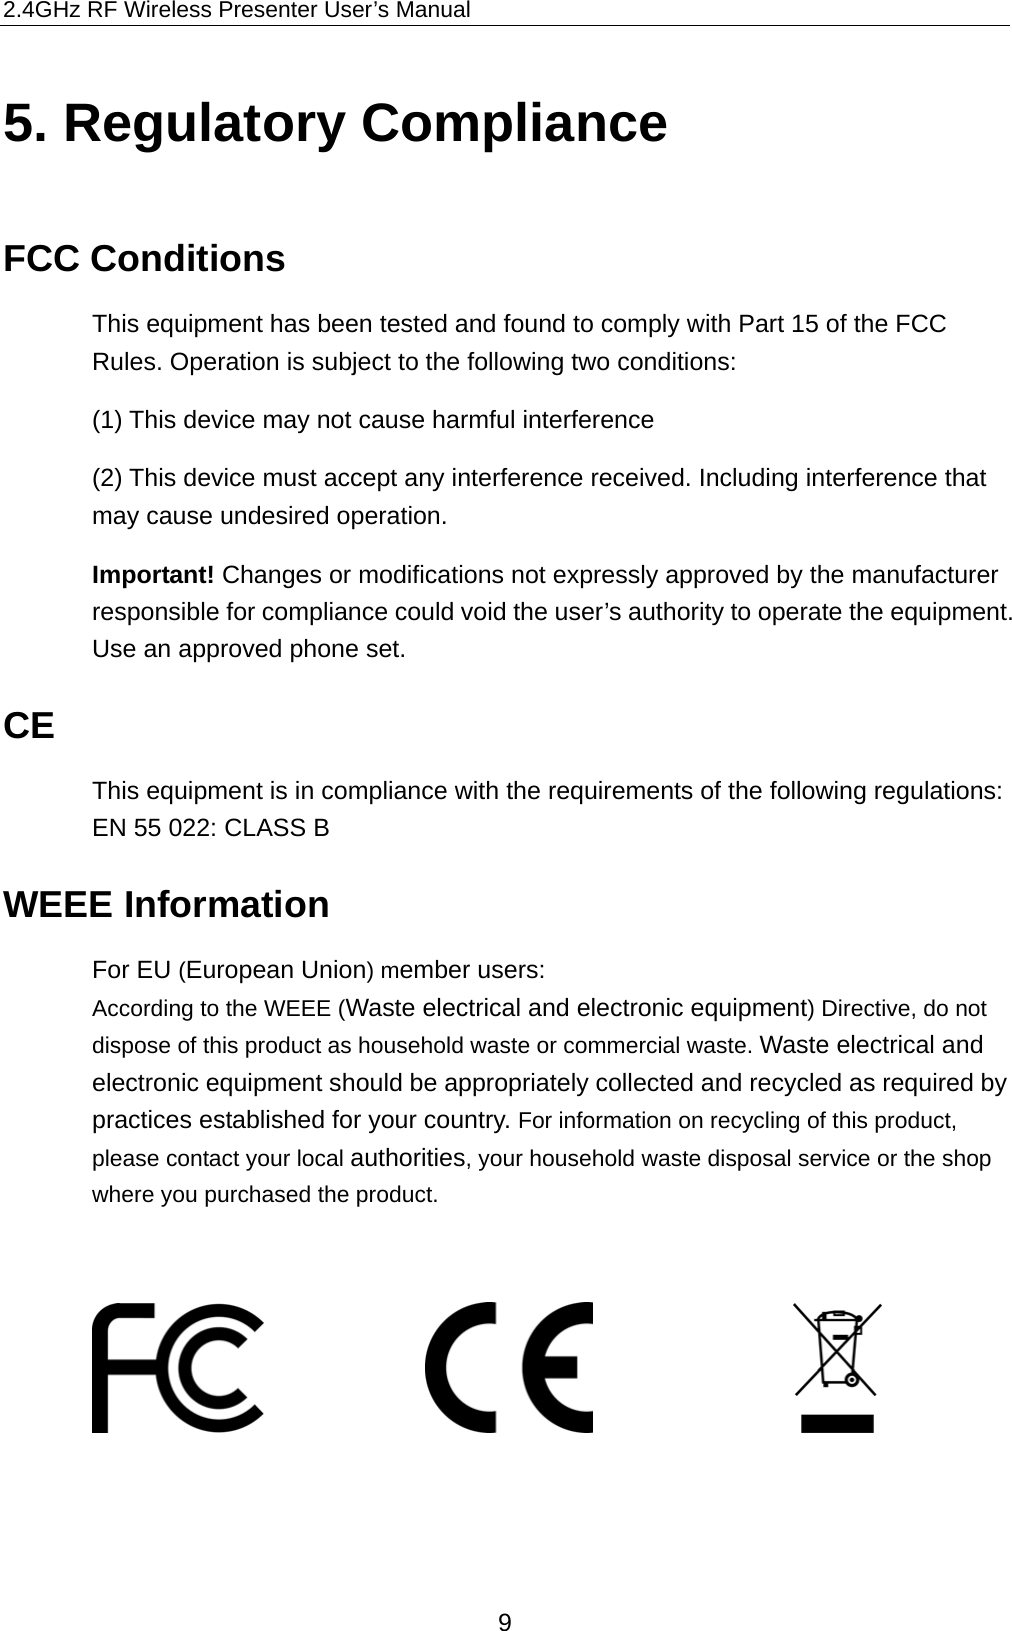 2.4GHz RF Wireless Presenter User’s Manual 5. Regulatory Compliance FCC Conditions This equipment has been tested and found to comply with Part 15 of the FCC Rules. Operation is subject to the following two conditions: (1) This device may not cause harmful interference (2) This device must accept any interference received. Including interference that may cause undesired operation.   Important! Changes or modifications not expressly approved by the manufacturer responsible for compliance could void the user’s authority to operate the equipment. Use an approved phone set. CE This equipment is in compliance with the requirements of the following regulations: EN 55 022: CLASS B WEEE Information For EU (European Union) member users:   According to the WEEE (Waste electrical and electronic equipment) Directive, do not dispose of this product as household waste or commercial waste. Waste electrical and electronic equipment should be appropriately collected and recycled as required by practices established for your country. For information on recycling of this product, please contact your local authorities, your household waste disposal service or the shop where you purchased the product.                                 9